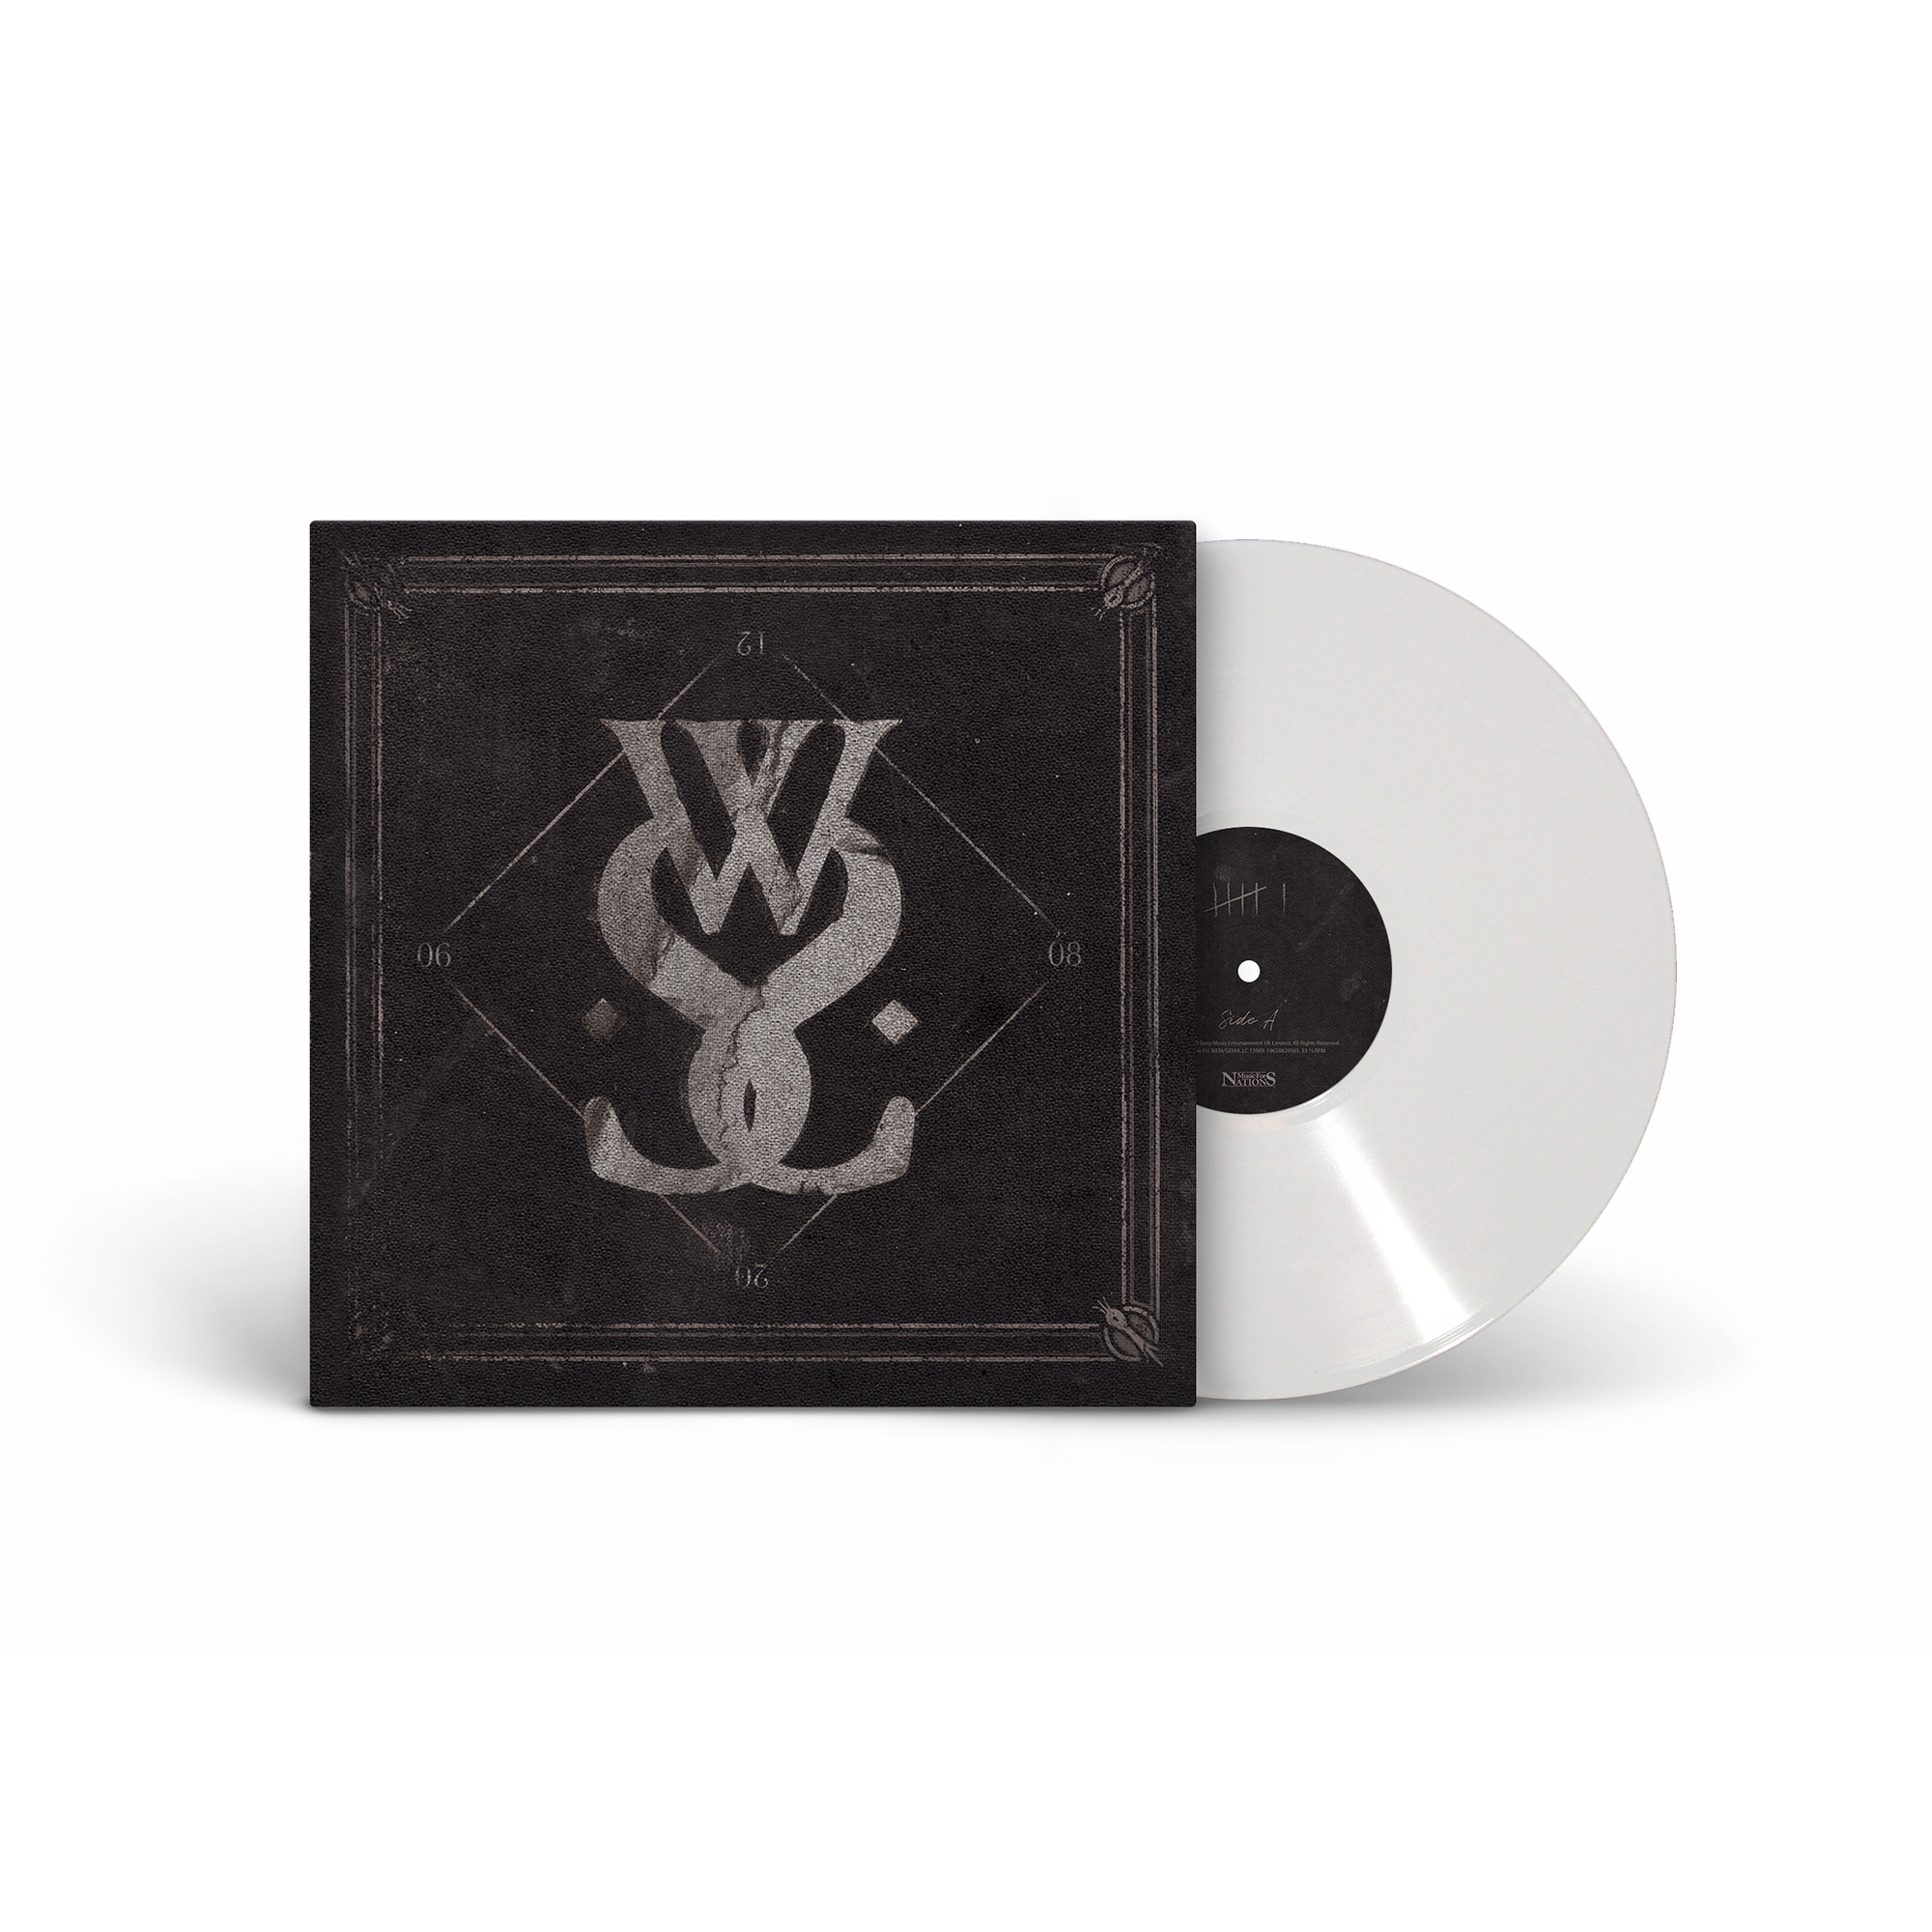 While She Sleeps - This Is The Six (10th Anniversary): Limited White Vinyl LP